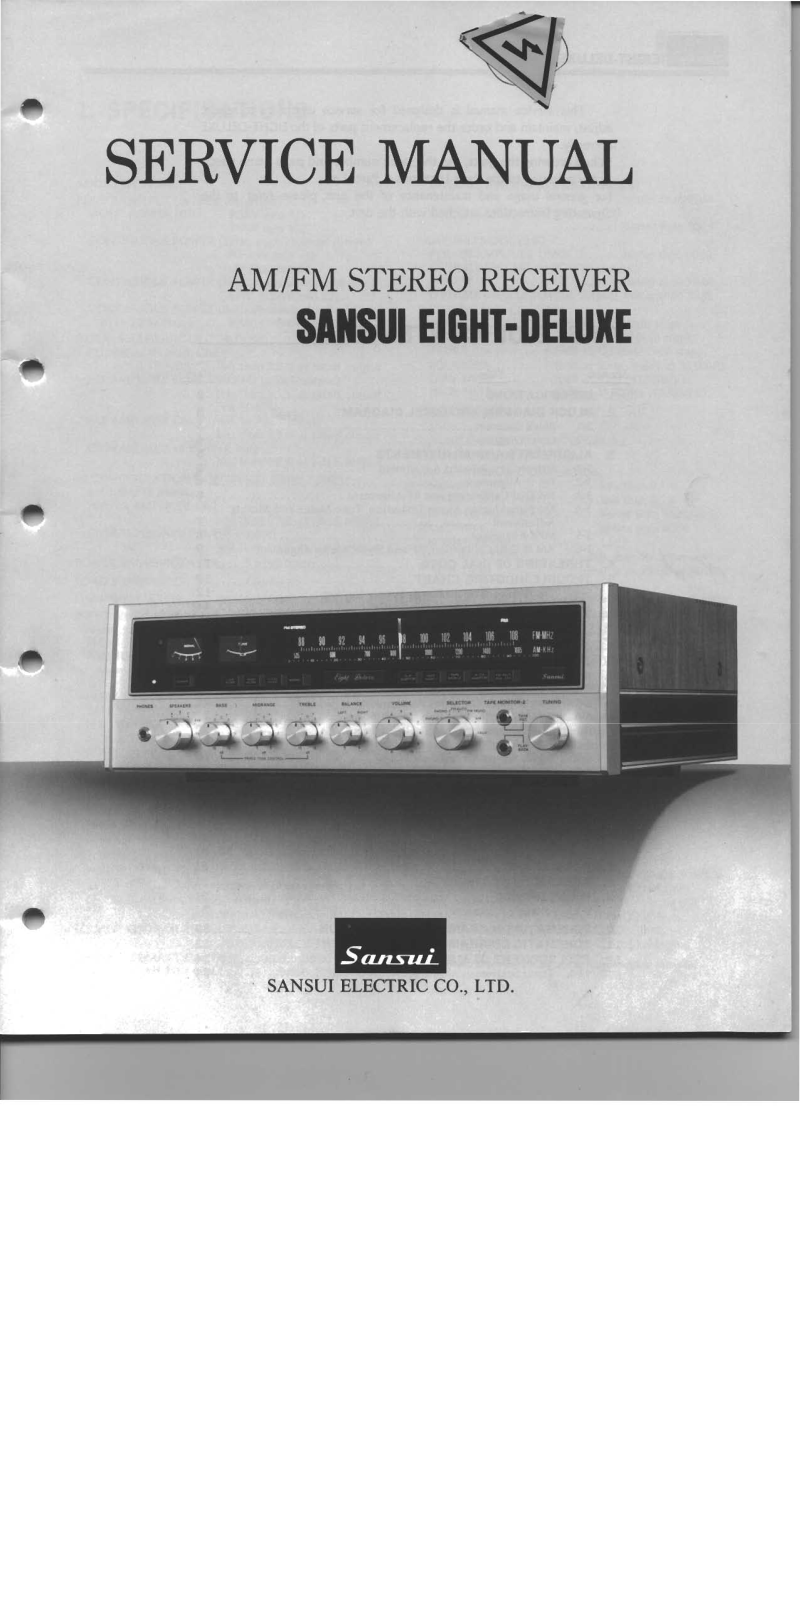 Sansui Eight Deluxe, 8 Deluxe Service manual